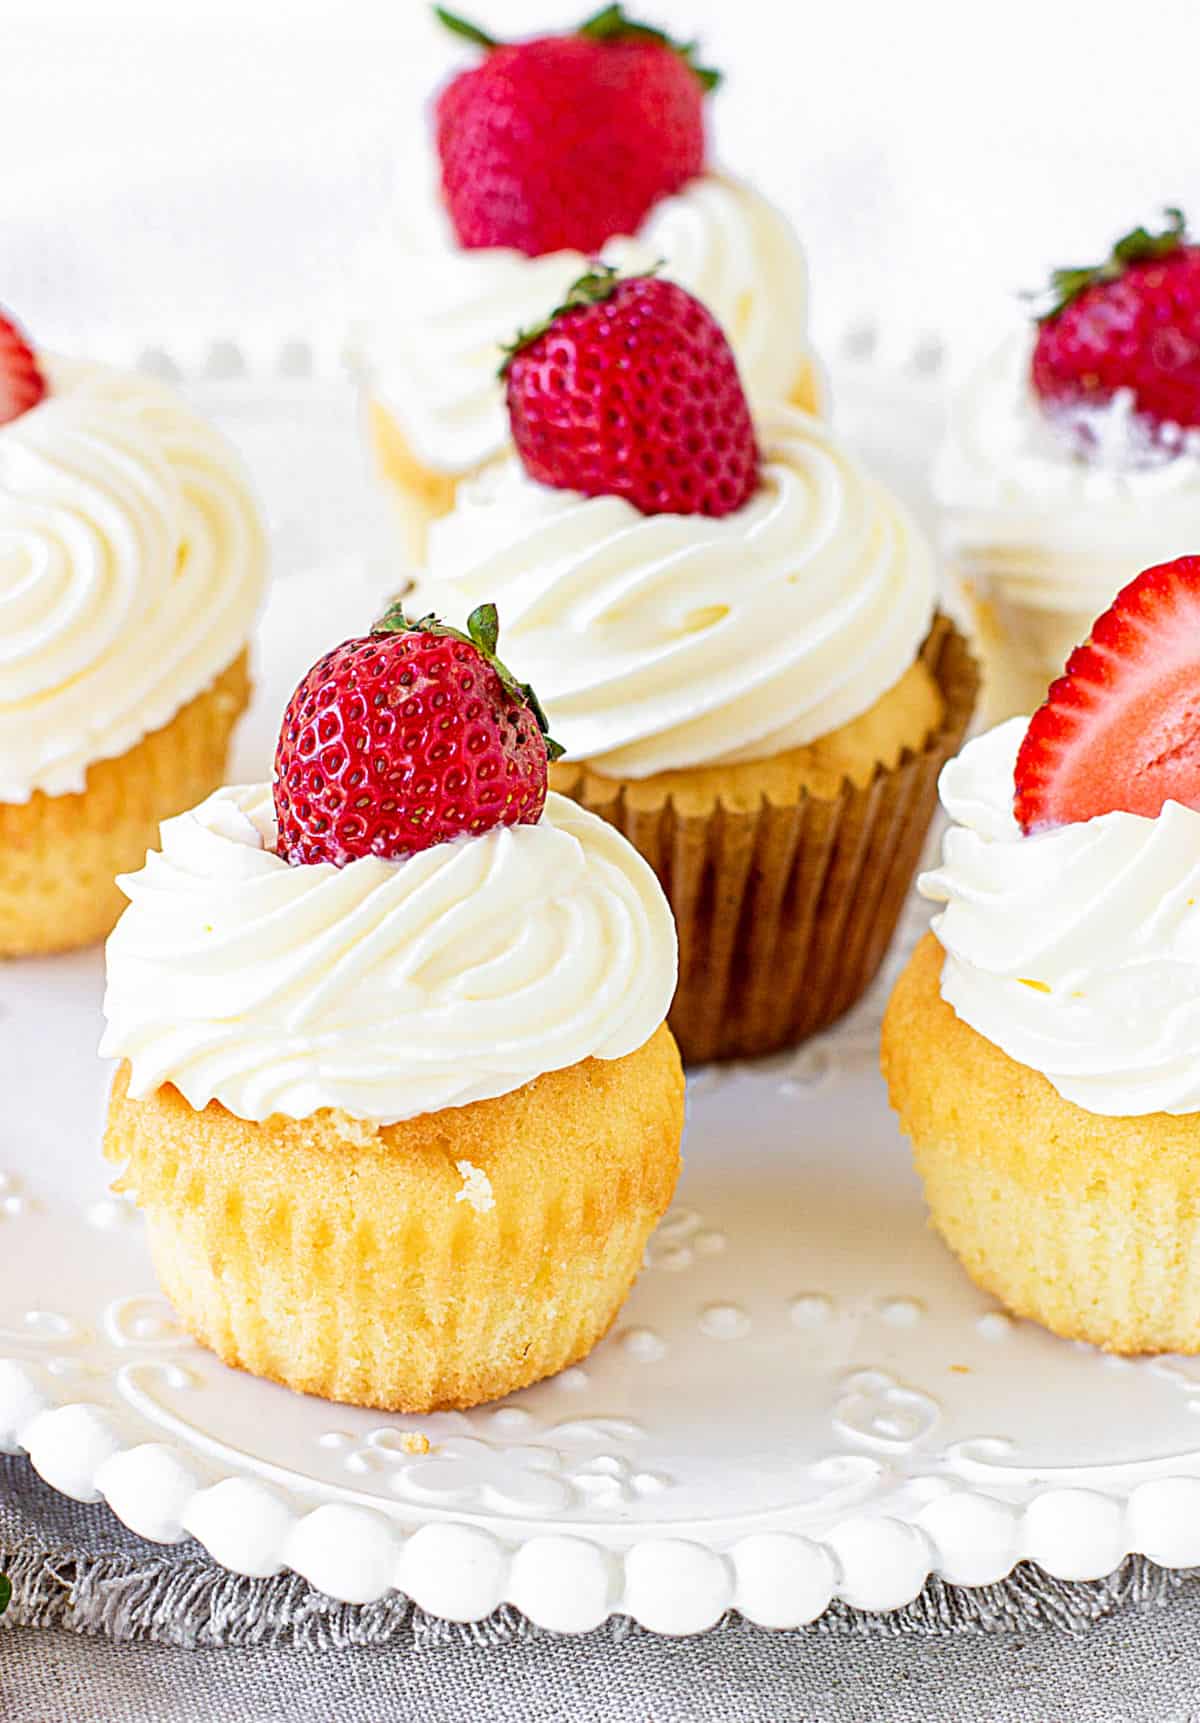 White plate with several cream and strawberry topped vanilla cupcakes